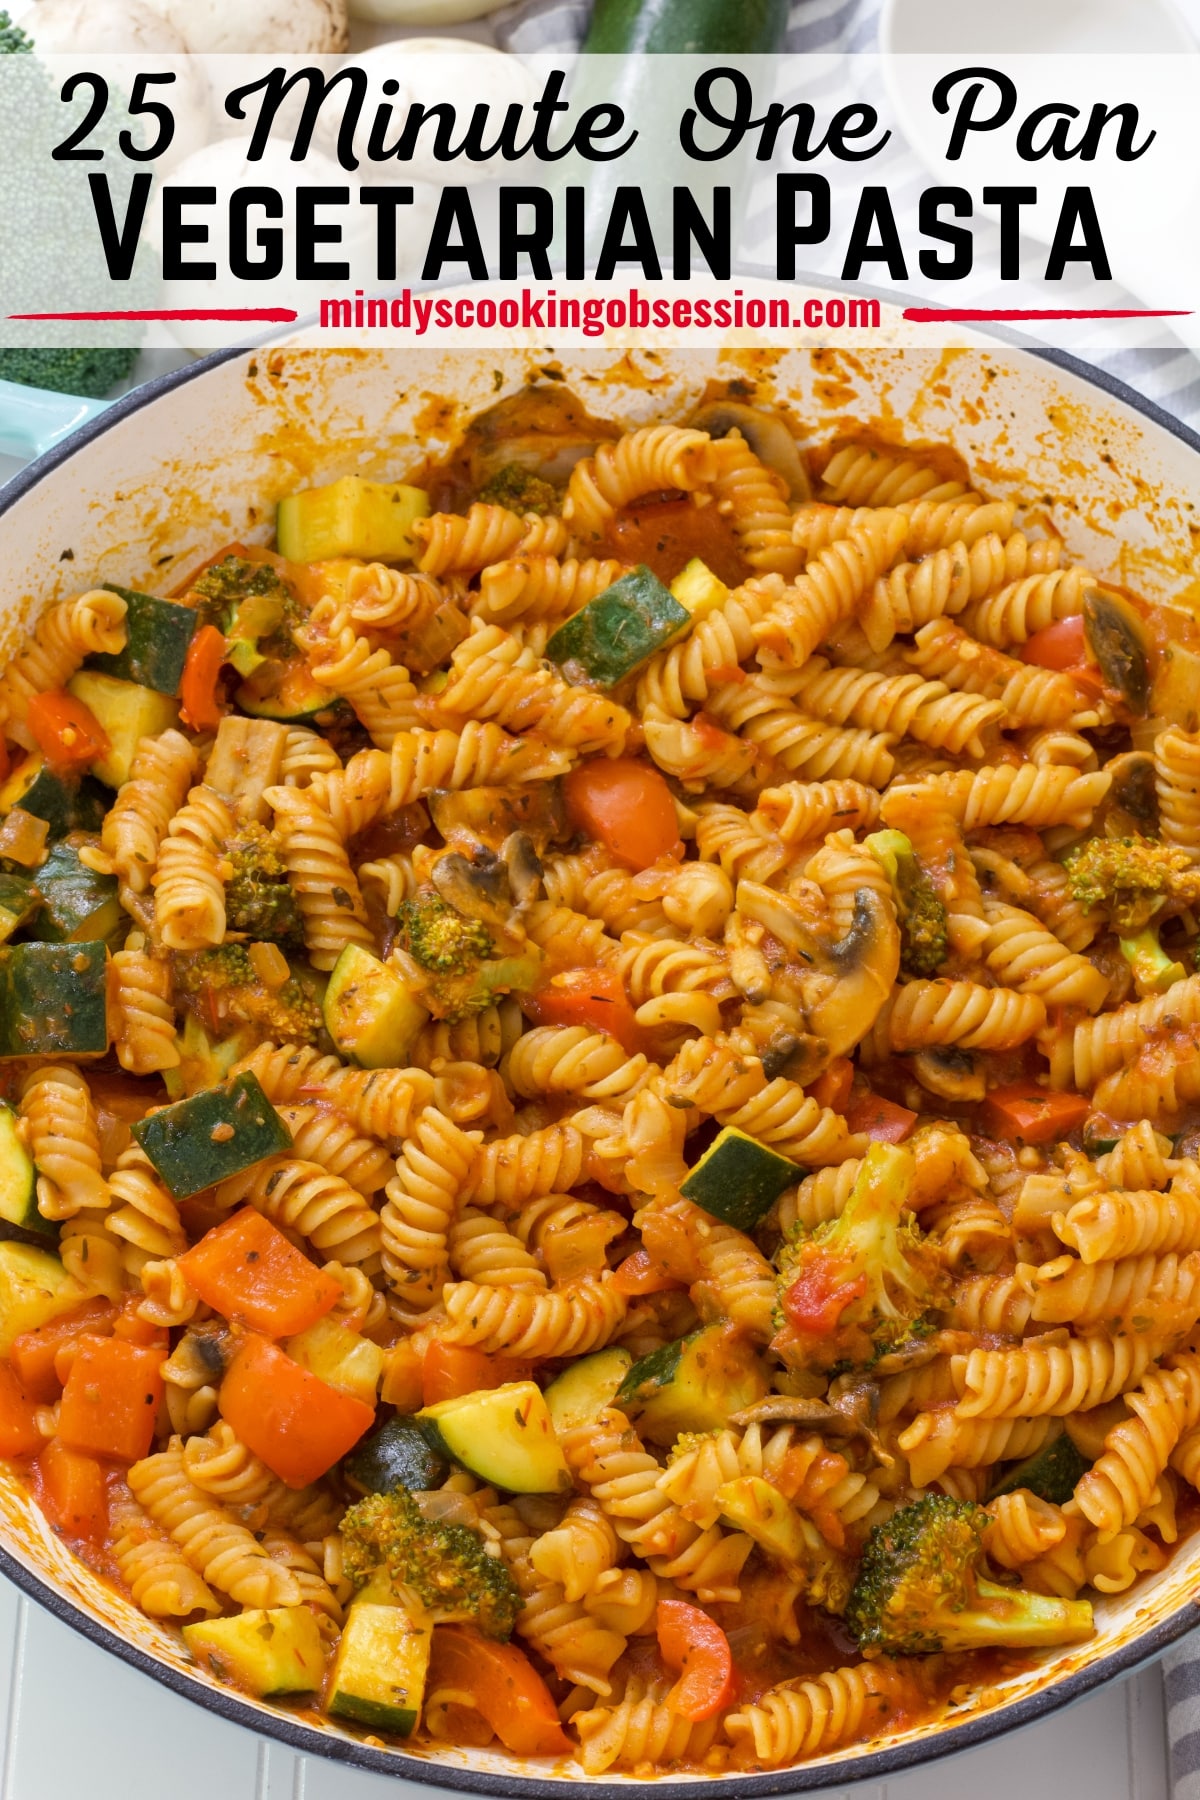 Easy 25 Minute One Pot Vegetarian Pasta Recipe uses simple ingredients, is healthy, has amazing flavor and is perfect for busy weeknights.  via @mindyscookingobsession